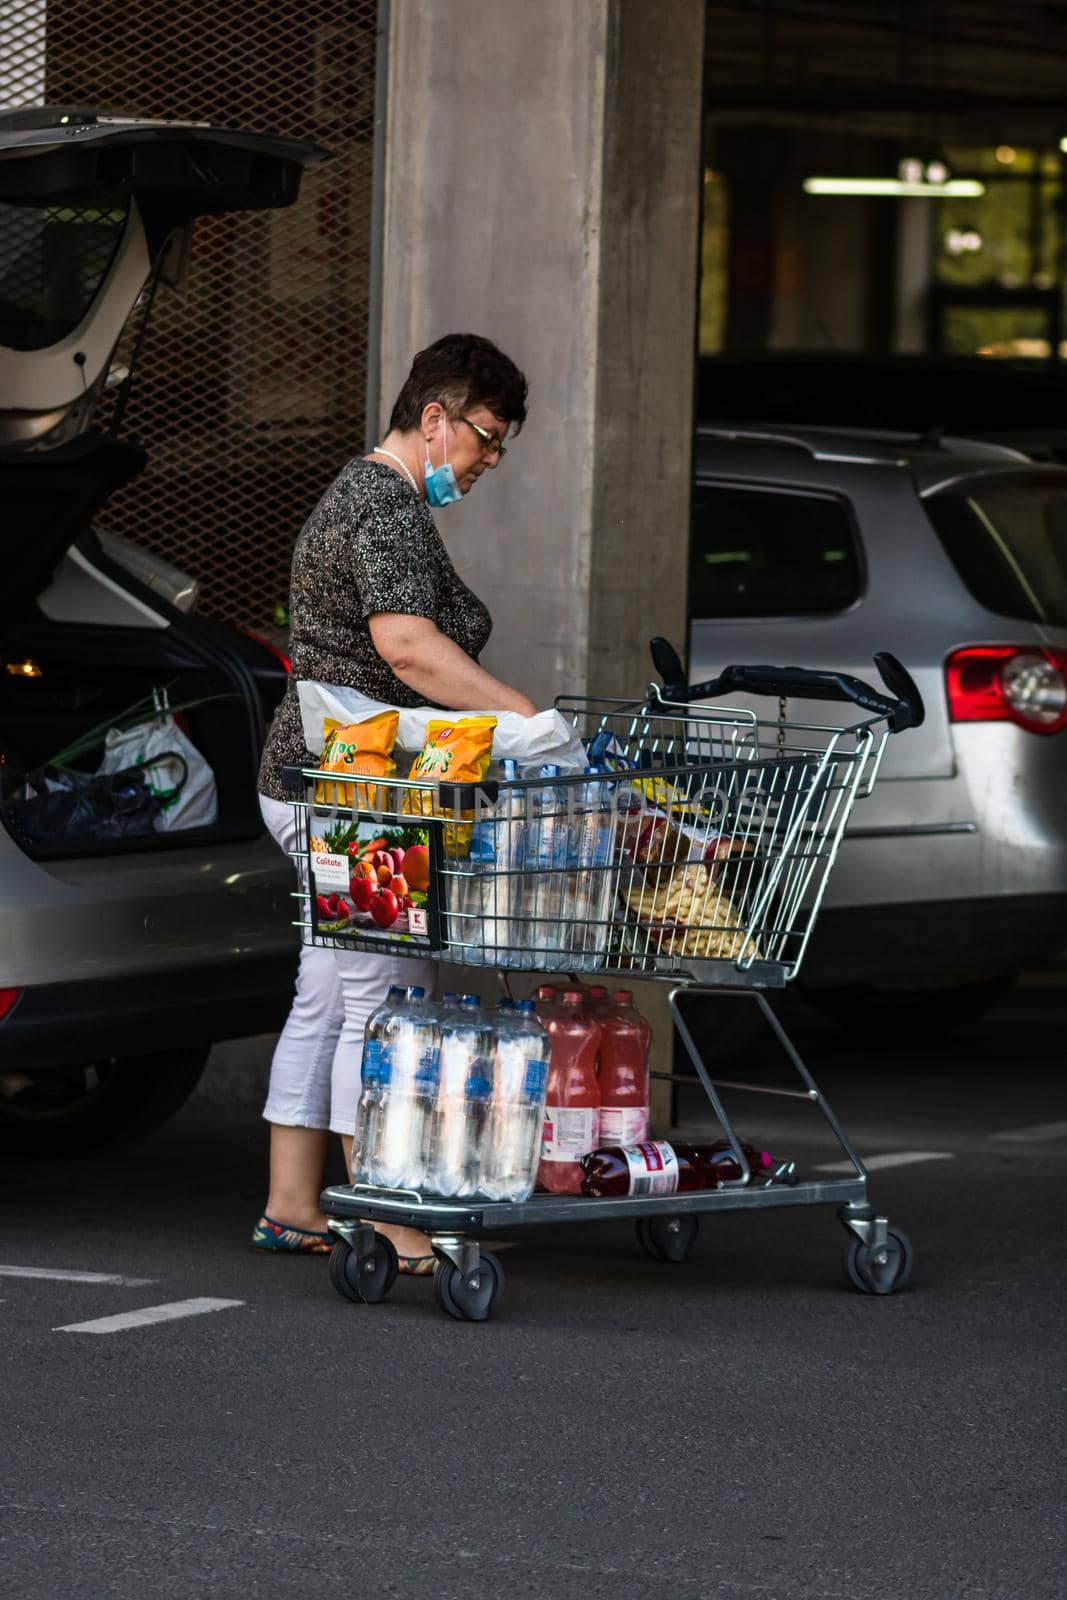 Woman wearing surgical mask with shopping cart full of goods, putting groceries in car trunk. Bucharest, Romania, 2020